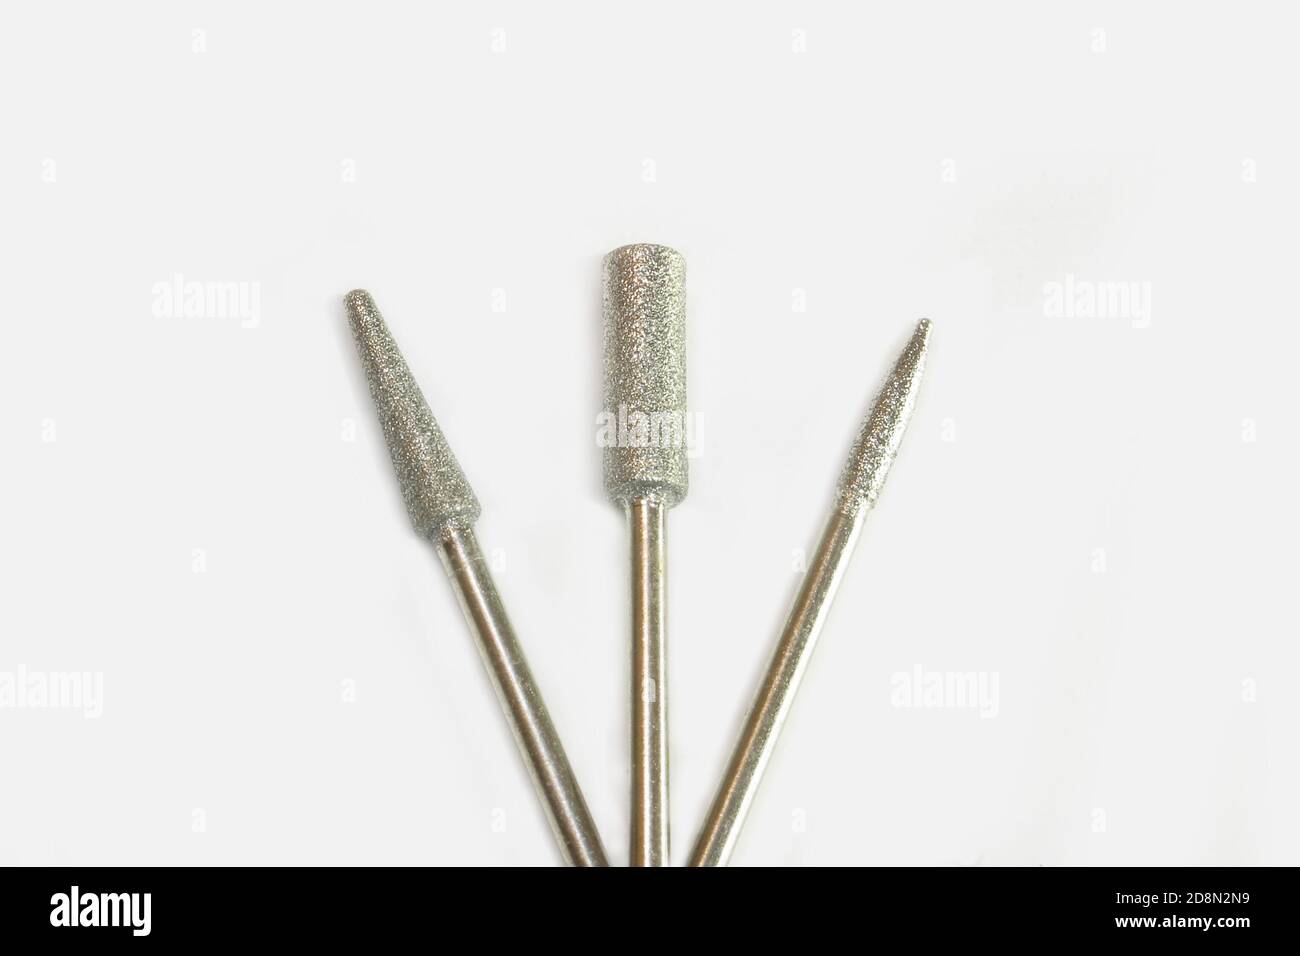 Set of three milling cutters for manicure creating Stock Photo